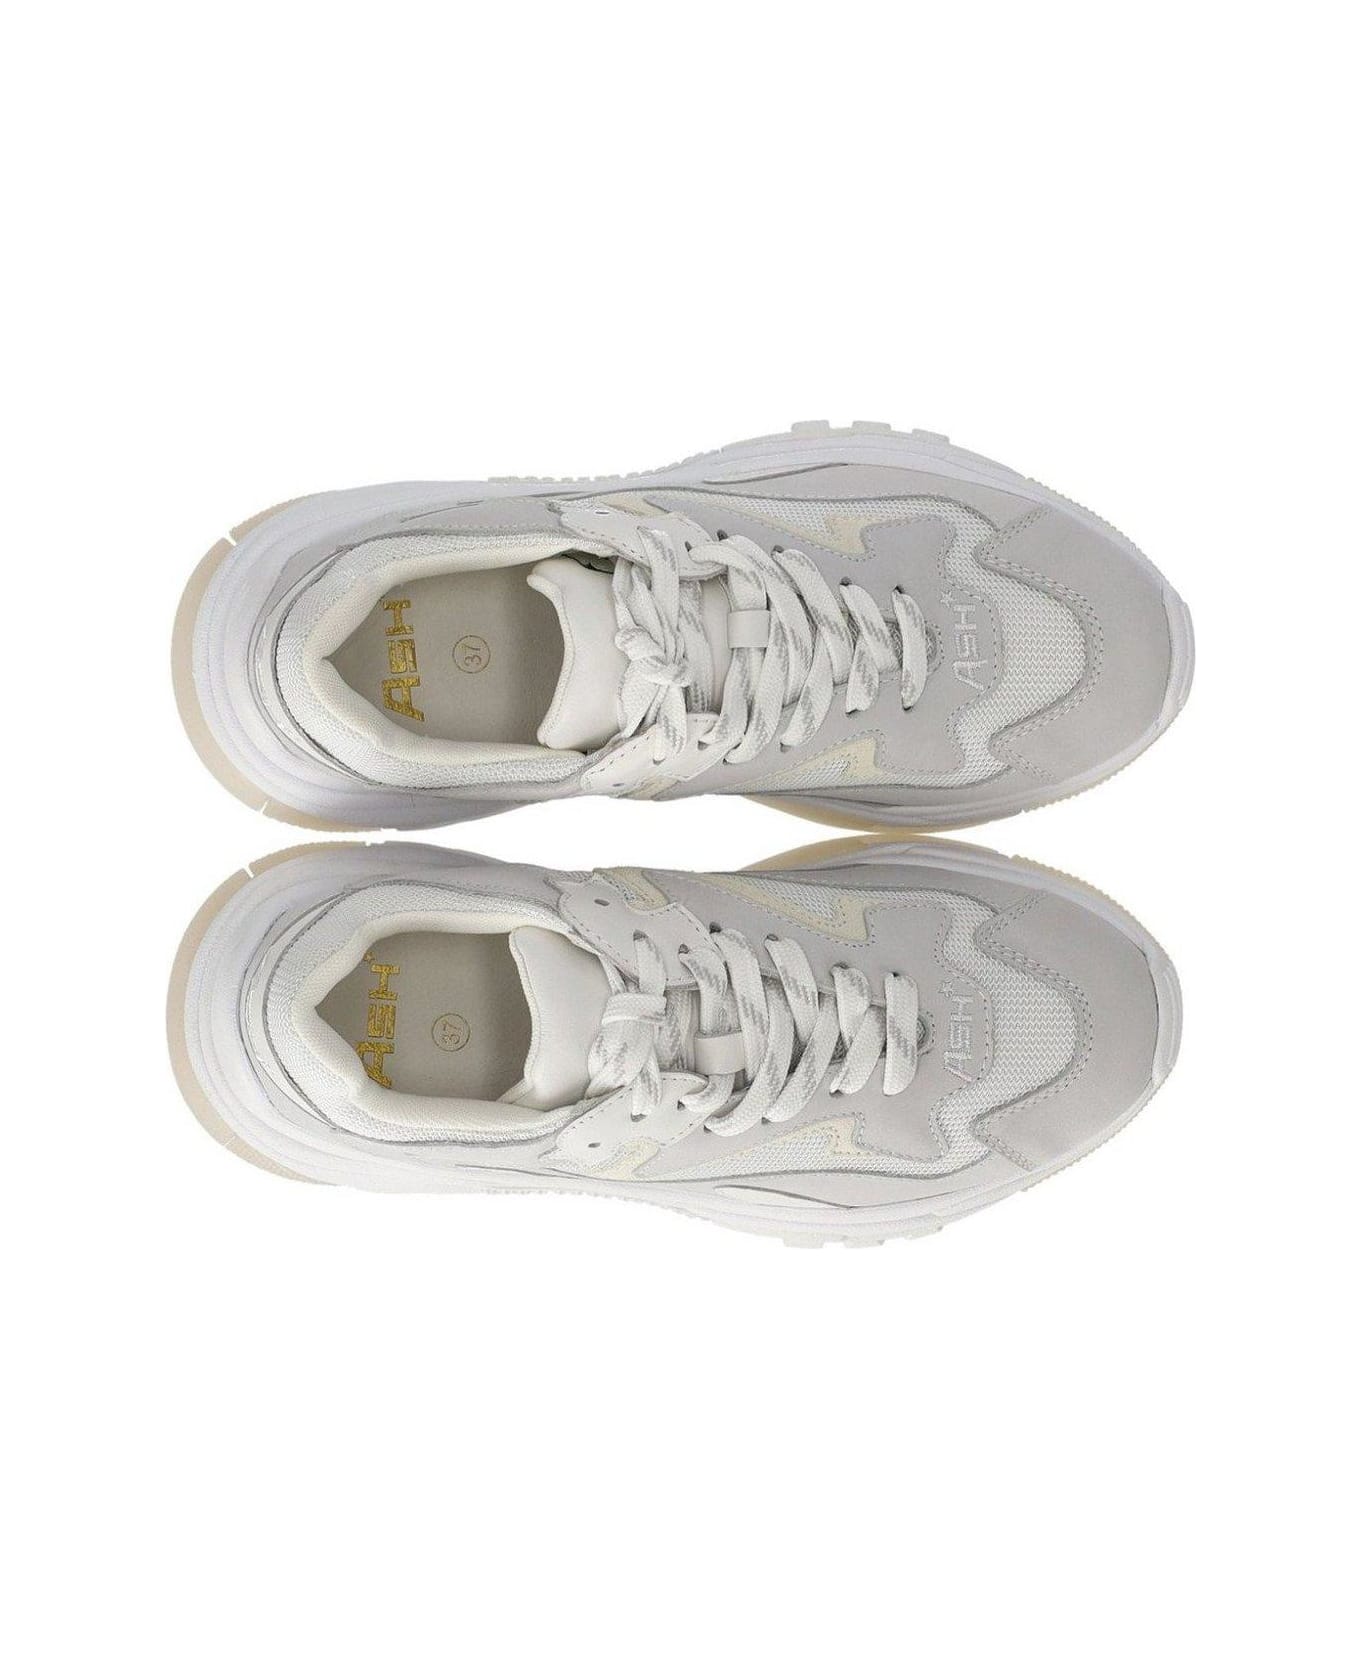 Ash Addict Panelled Lace-up Sneakers - Bianco スニーカー